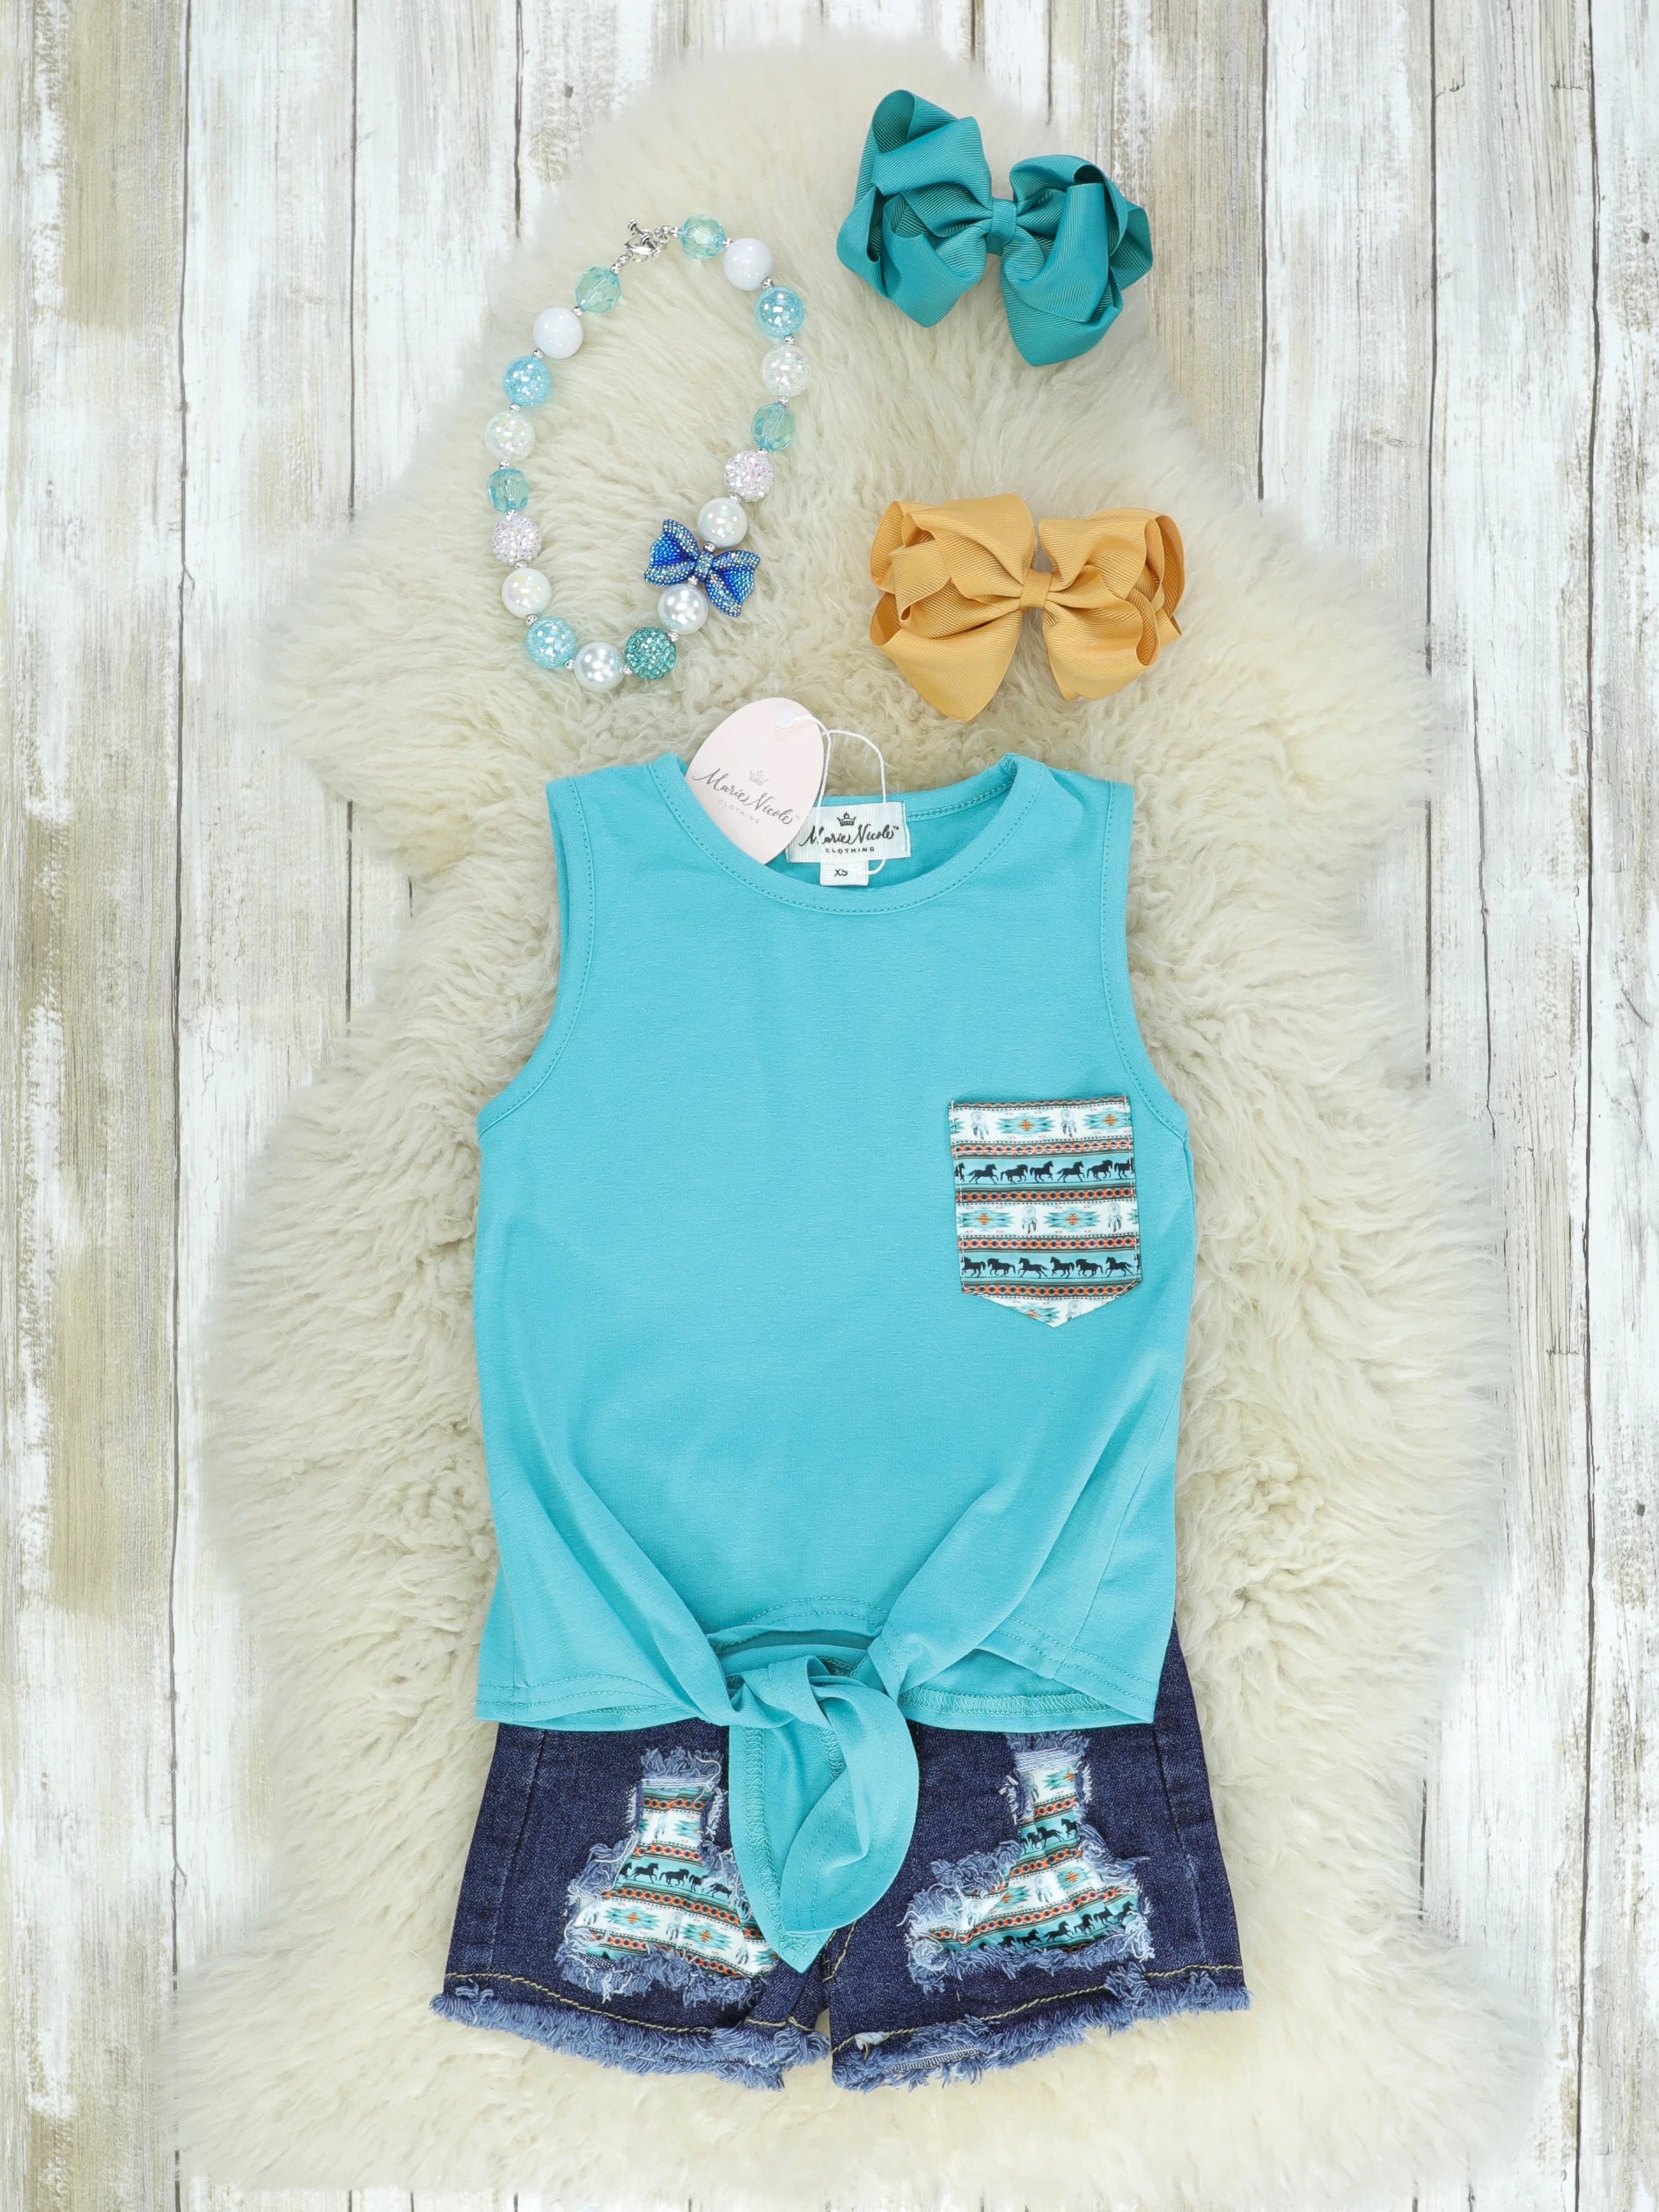 Horse Aztec Teal Tie Tank Denim Shorts Outfit